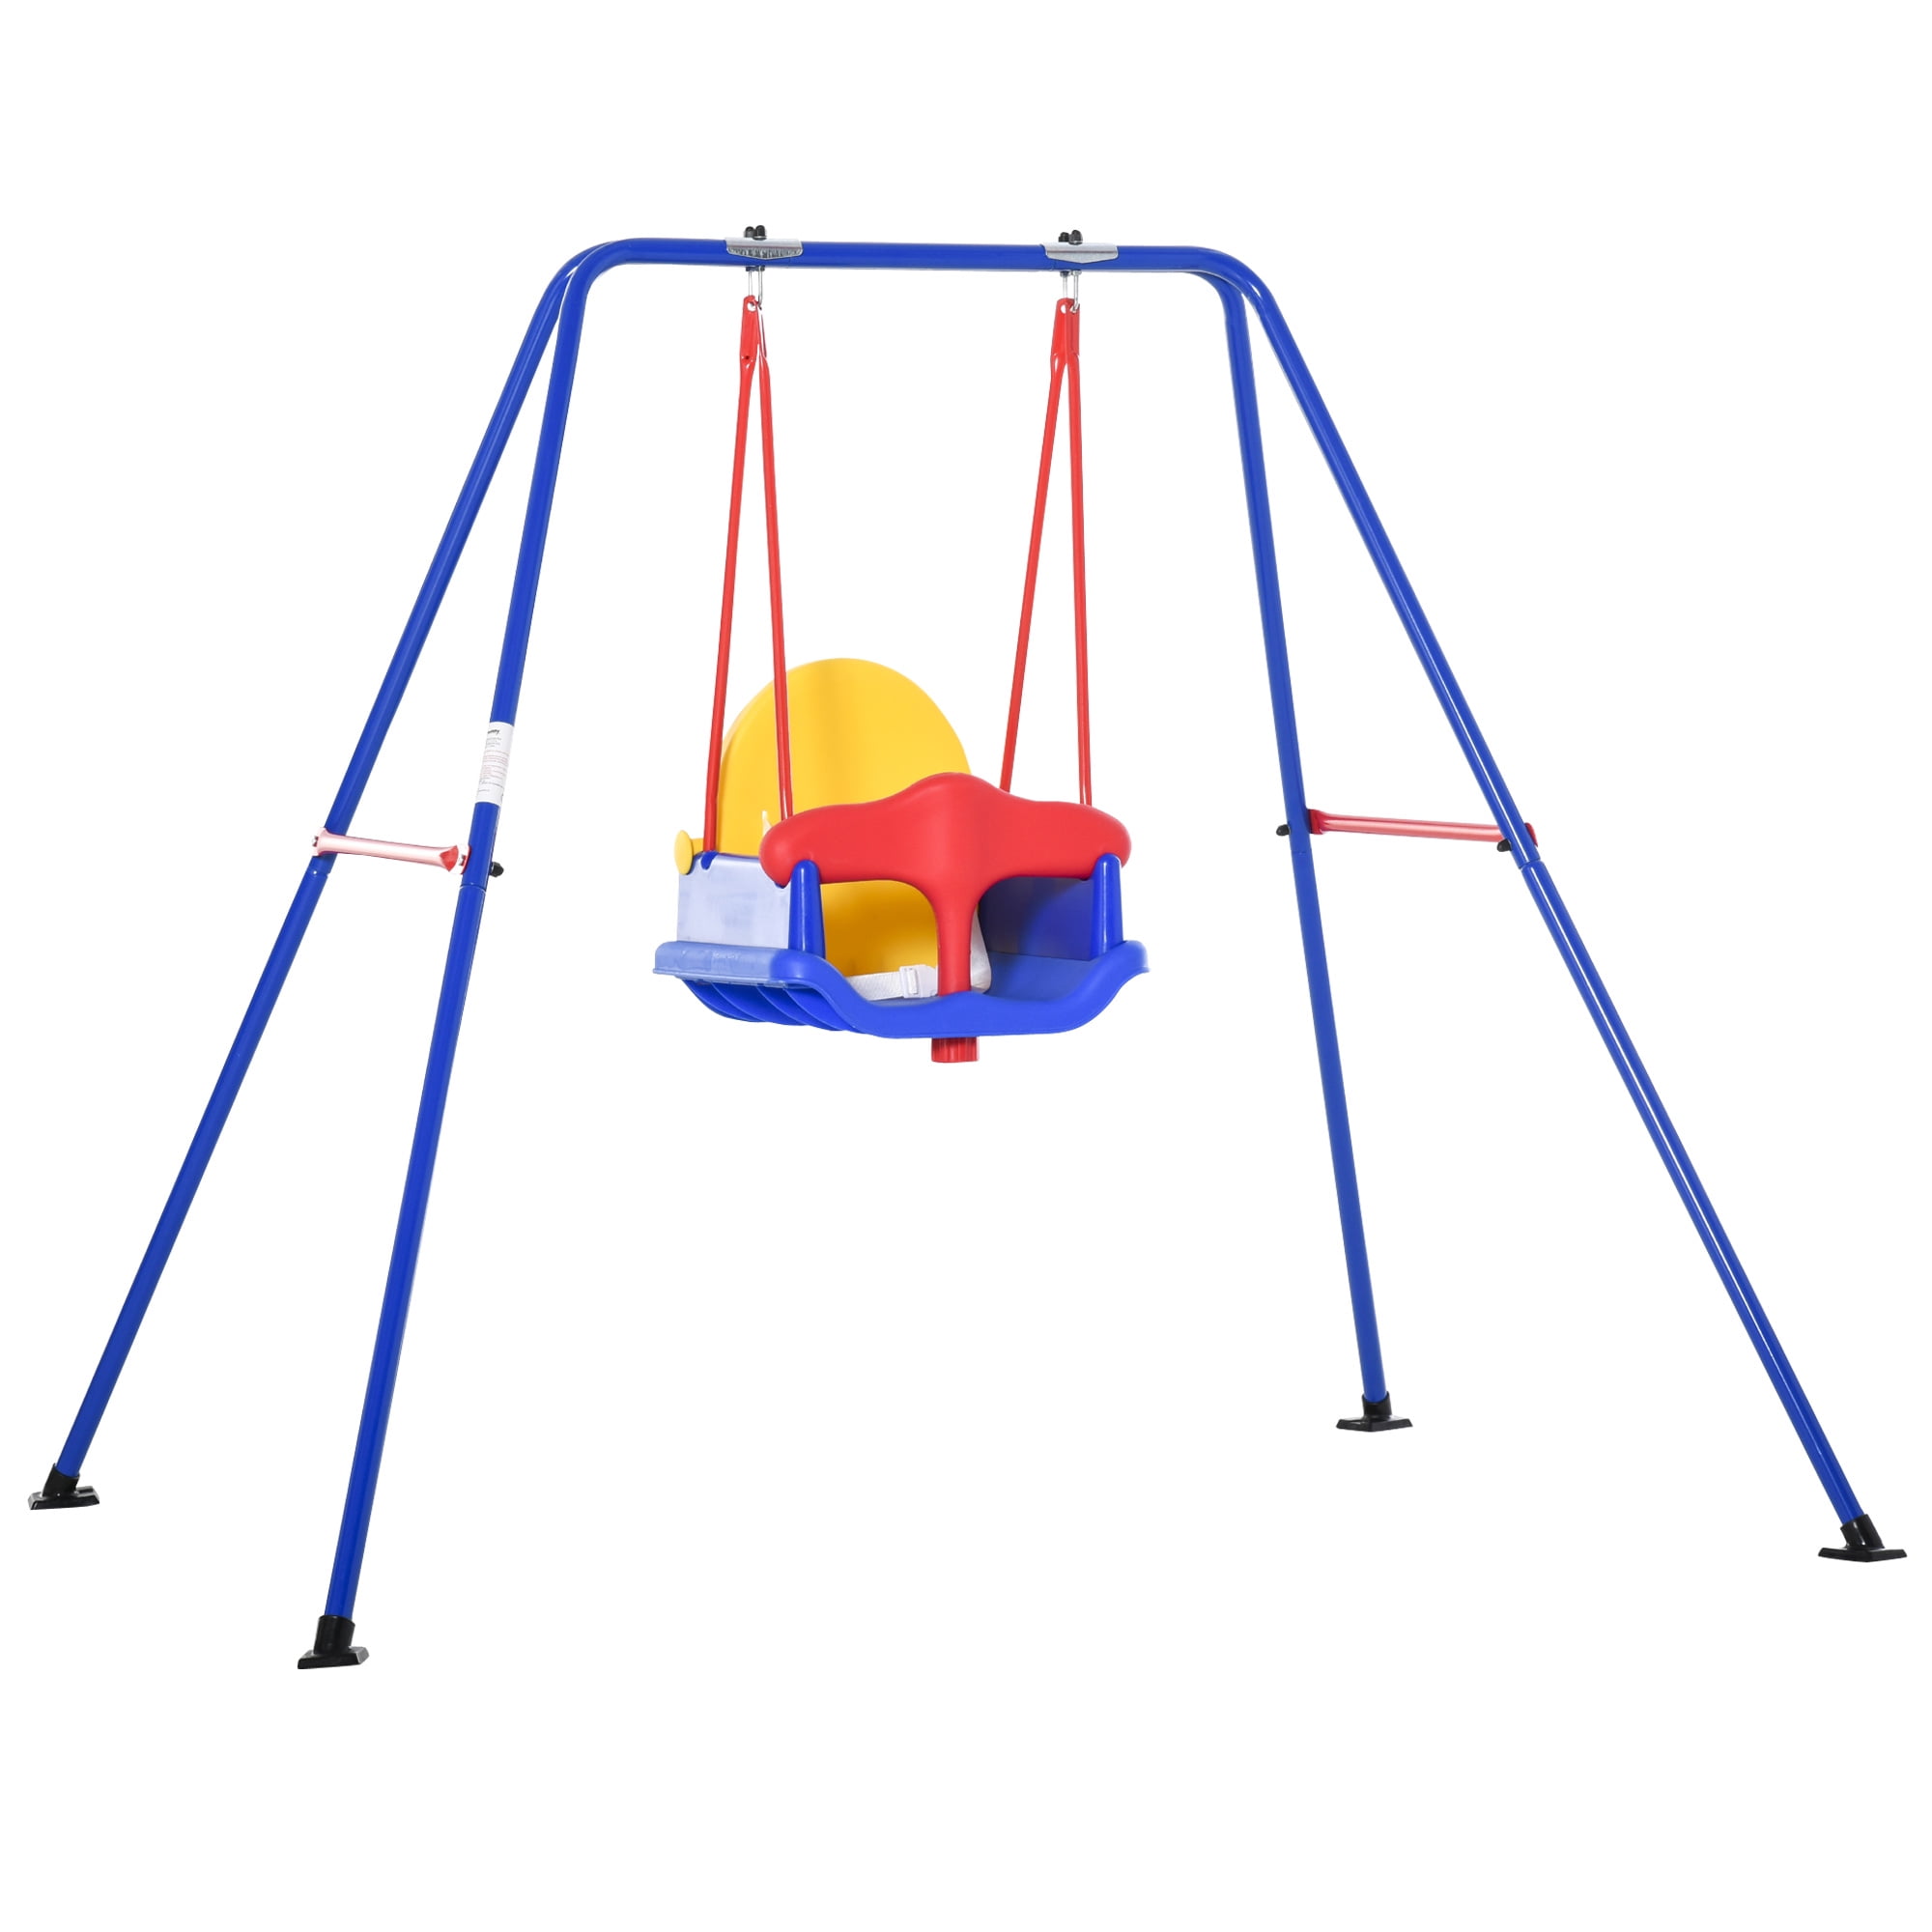 HIG Swing Seat with Metal Triangular Buckle Playground Swing Set Accessories for Kids and Adults Blue 